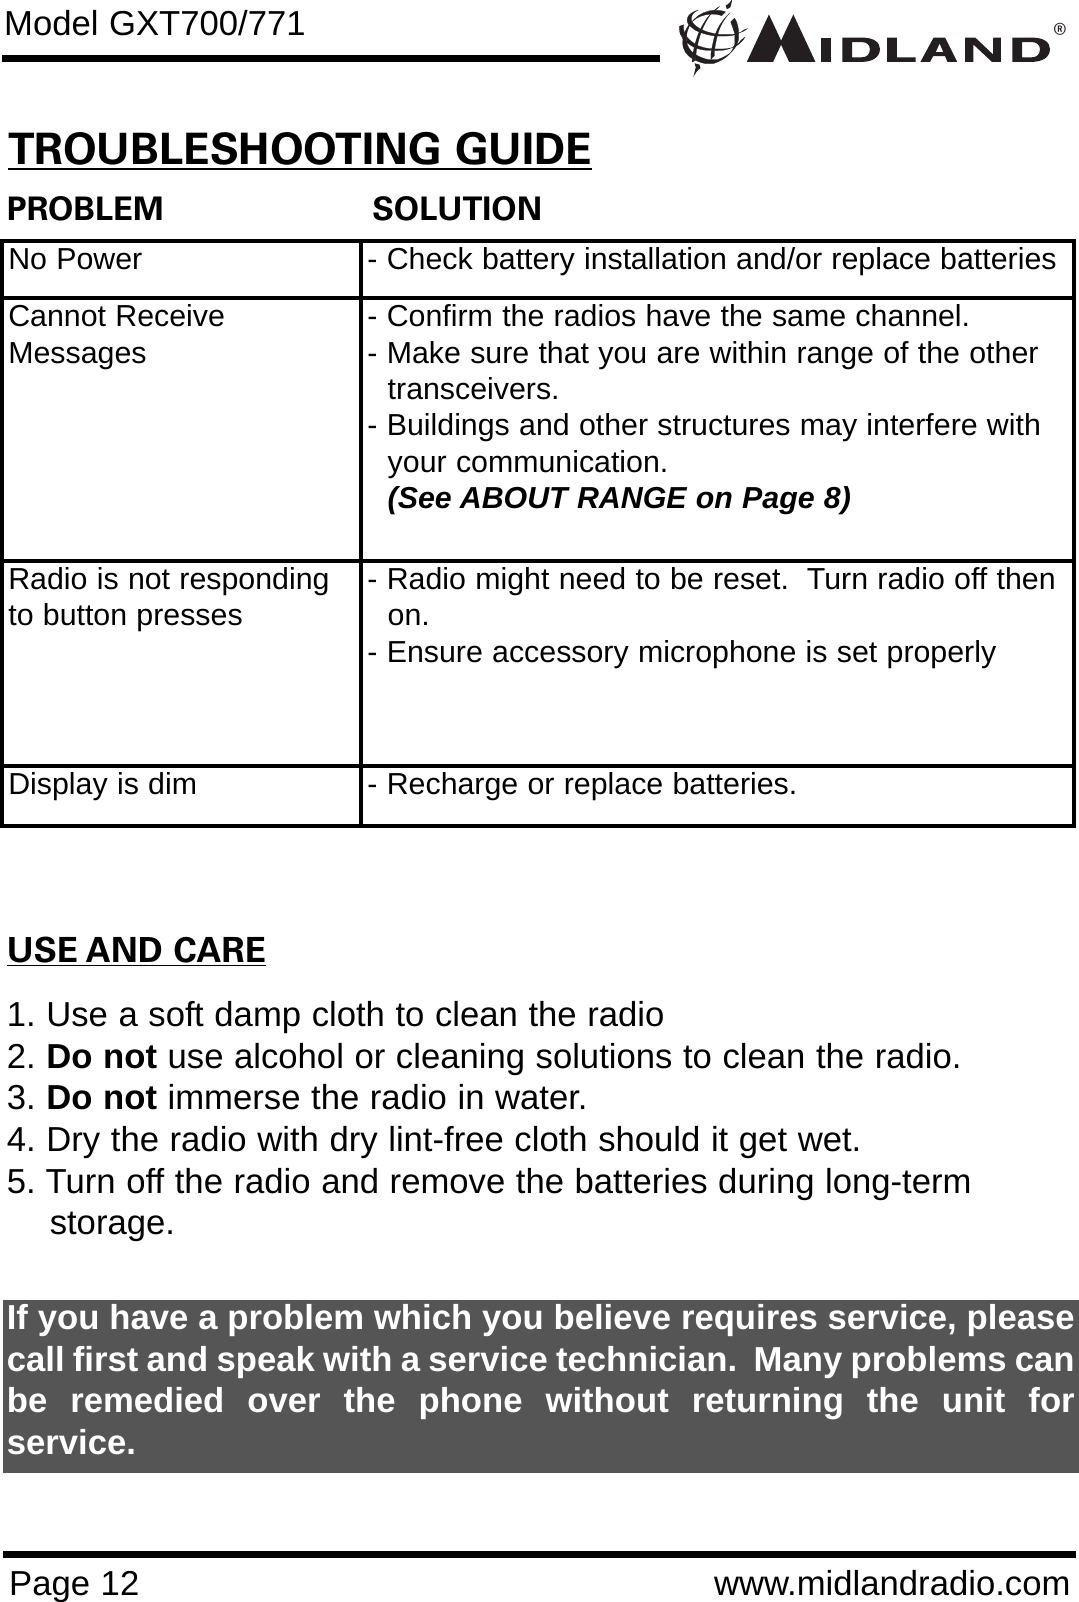 ®Page 12 www.midlandradio.comPROBLEM                     SOLUTIONNo Power - Check battery installation and/or replace batteriesCannot ReceiveMessages - Confirm the radios have the same channel.      - Make sure that you are within range of the other transceivers.- Buildings and other structures may interfere with your communication. (See ABOUT RANGE on Page 8)Radio is not respondingto button presses - Radio might need to be reset.  Turn radio off then on.- Ensure accessory microphone is set properlyDisplay is dim - Recharge or replace batteries.USE AND CARE1. Use a soft damp cloth to clean the radio2. Do not use alcohol or cleaning solutions to clean the radio.3. Do not immerse the radio in water.4. Dry the radio with dry lint-free cloth should it get wet.5. Turn off the radio and remove the batteries during long-term    storage.If you have a problem which you believe requires service, pleasecall first and speak with a service technician.  Many problems canbe remedied over the phone without returning the unit forservice.Model GXT700/771TROUBLESHOOTING GUIDE